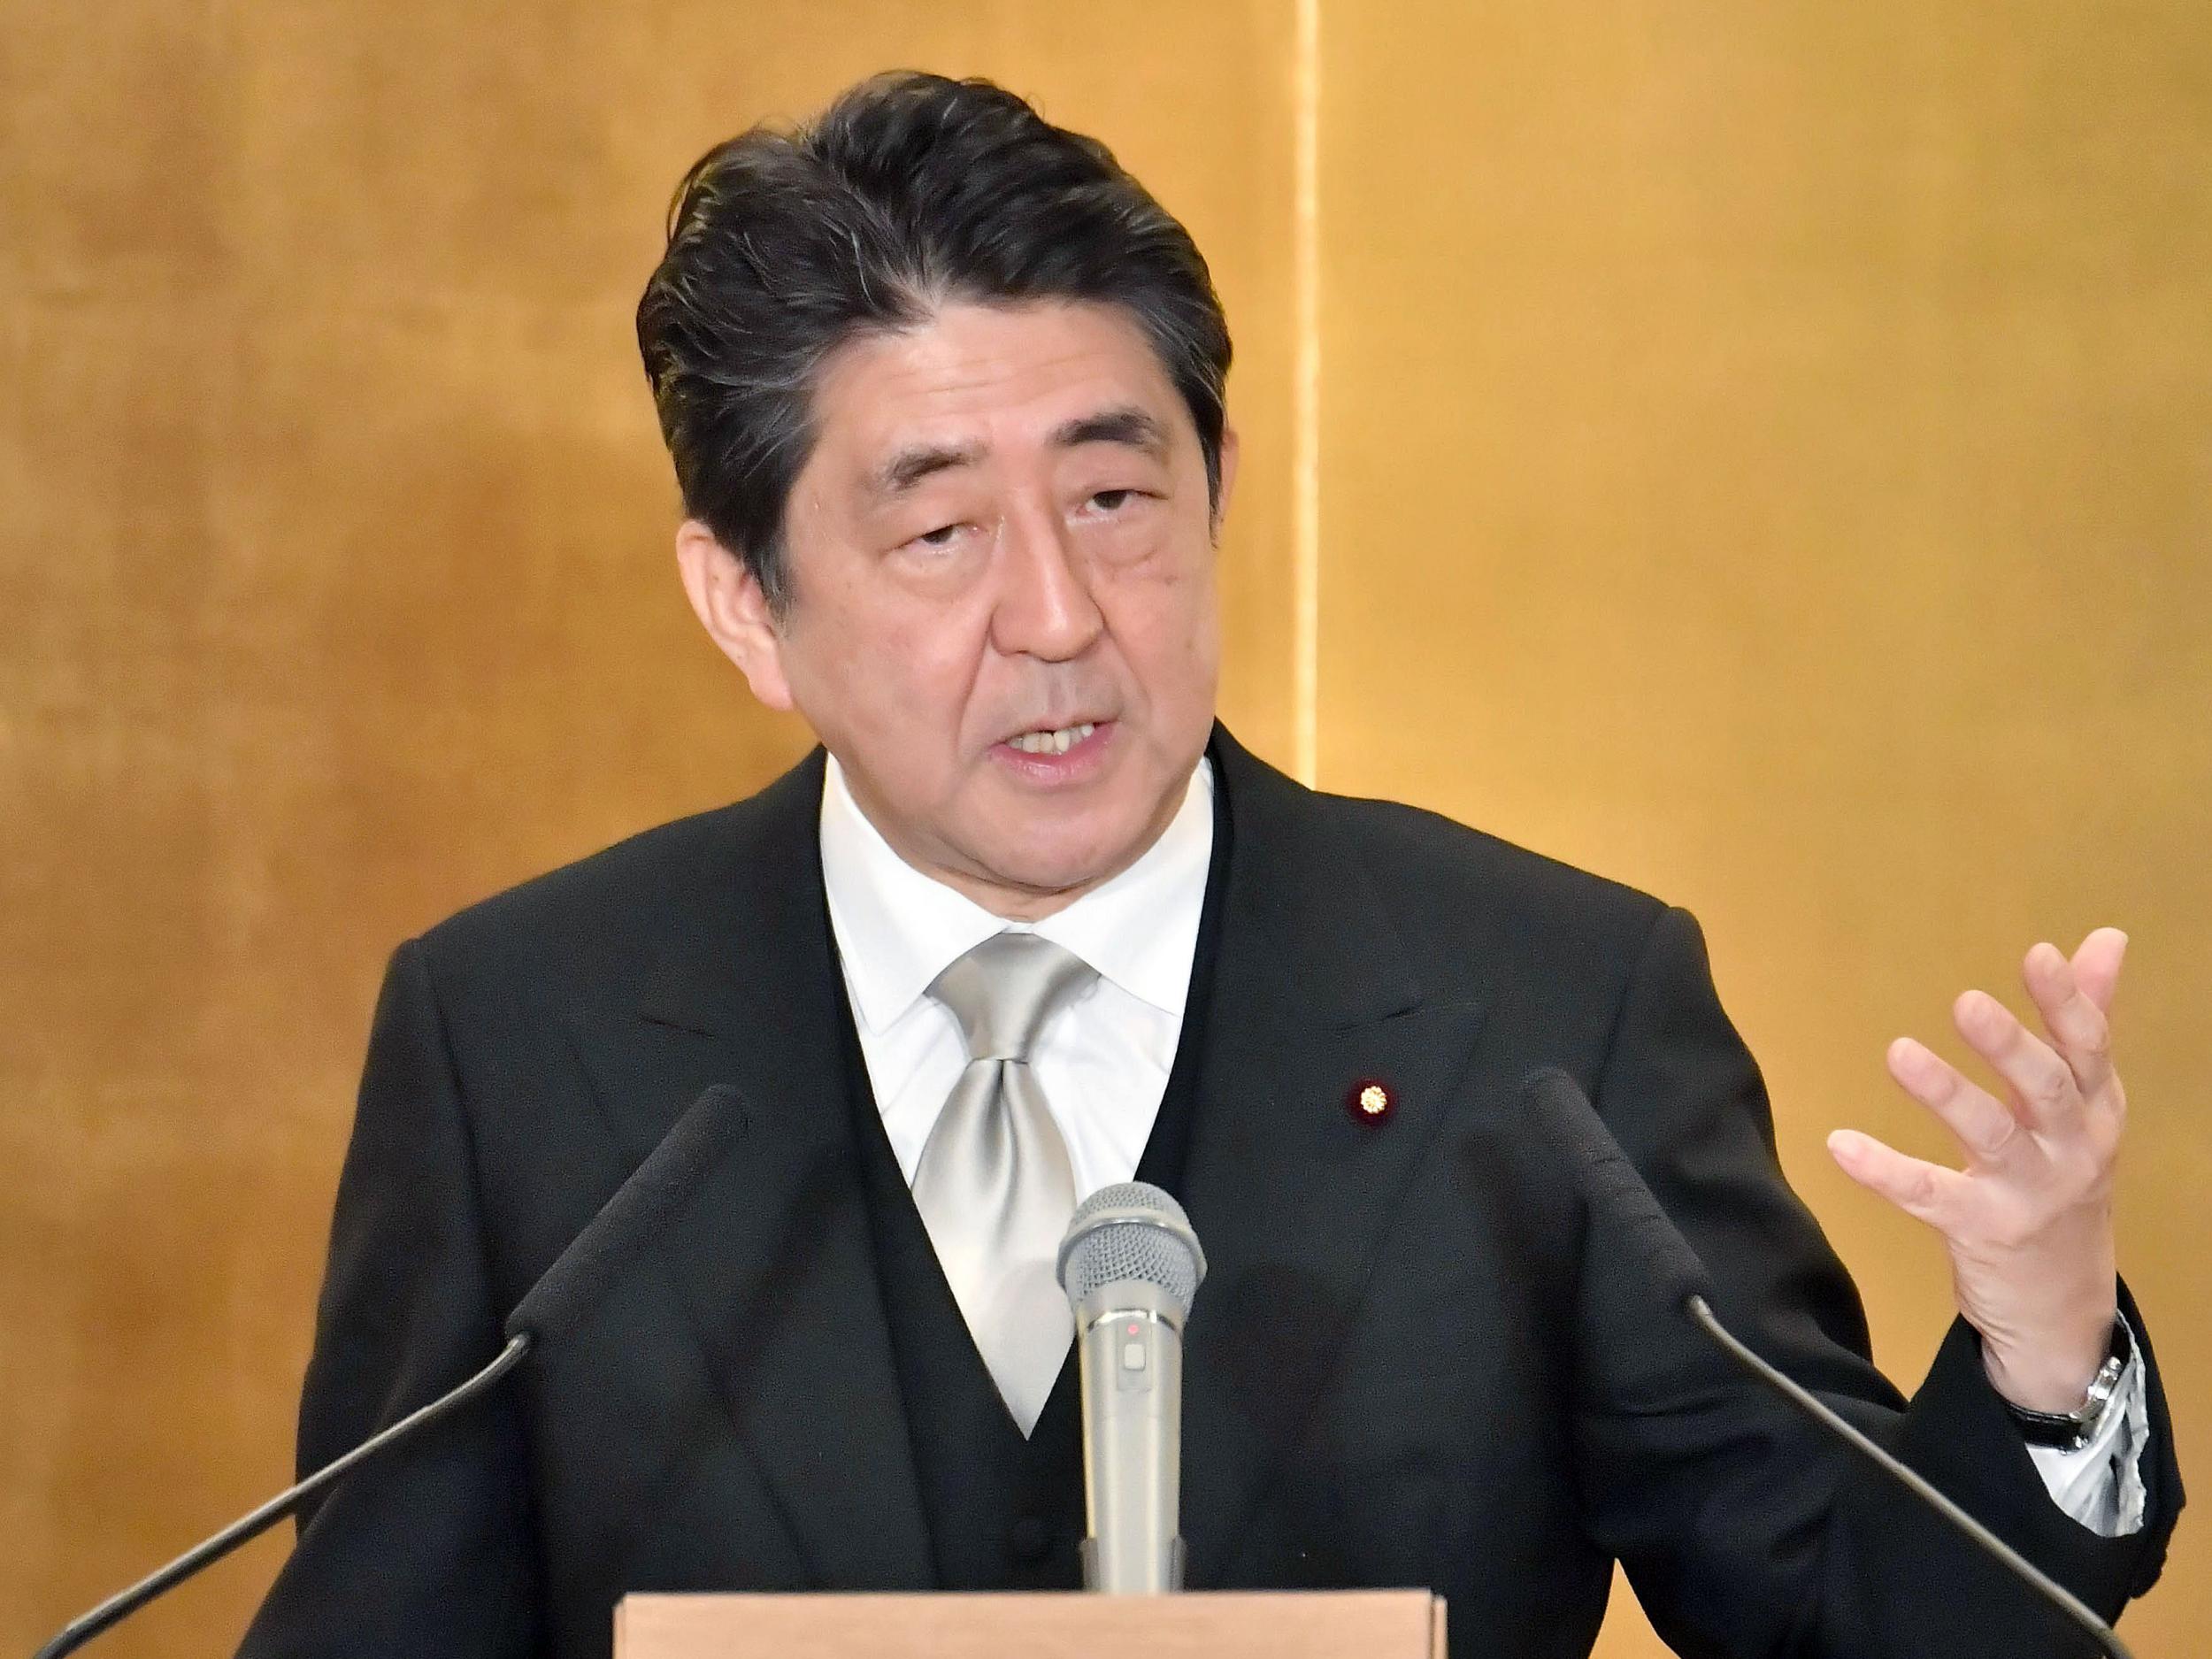 Japan's Prime Minister Shinzo Abe has expressed no desire to relax border controls